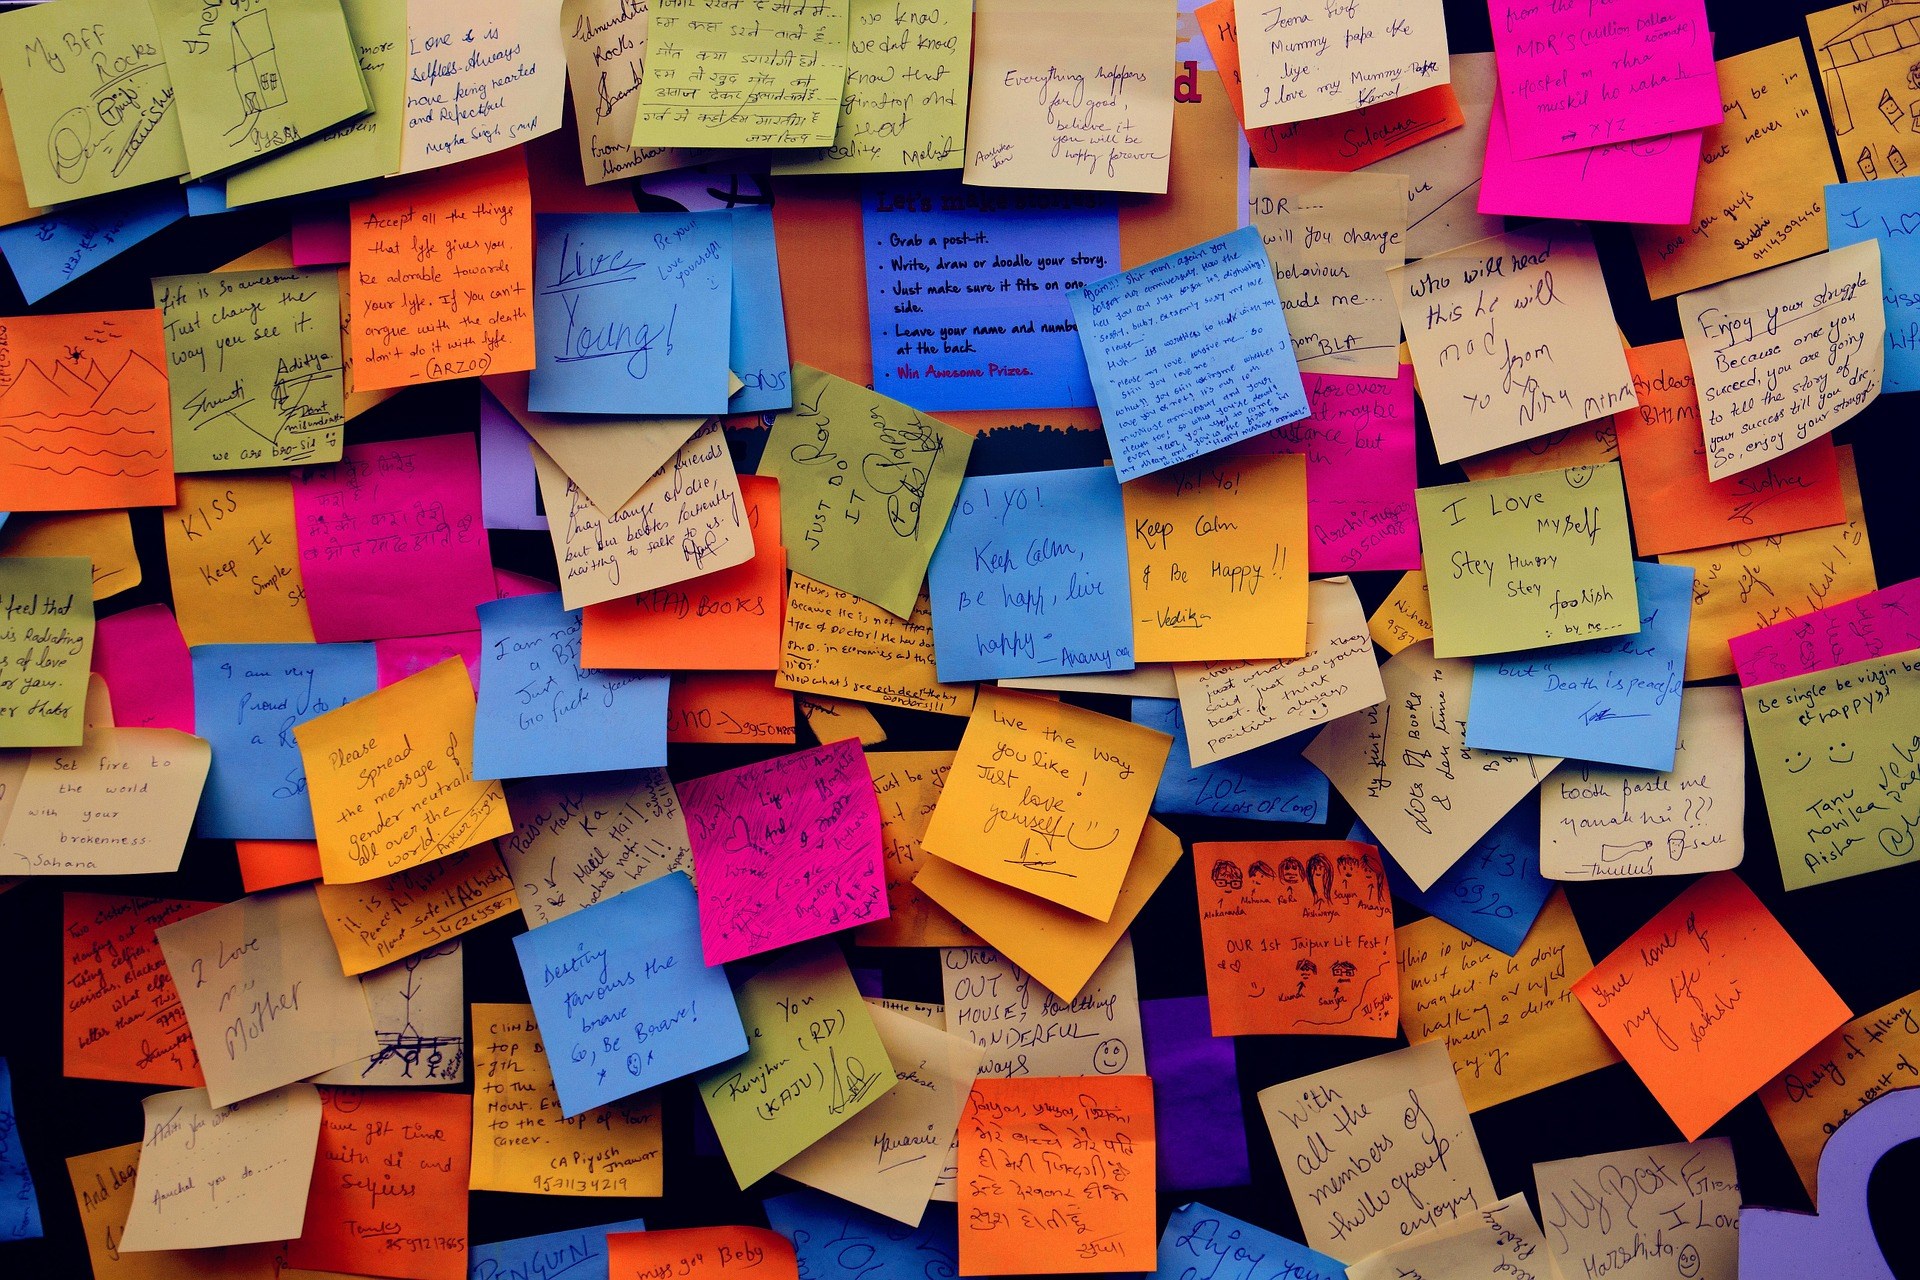 Digitising sticky notes with Deep Learning